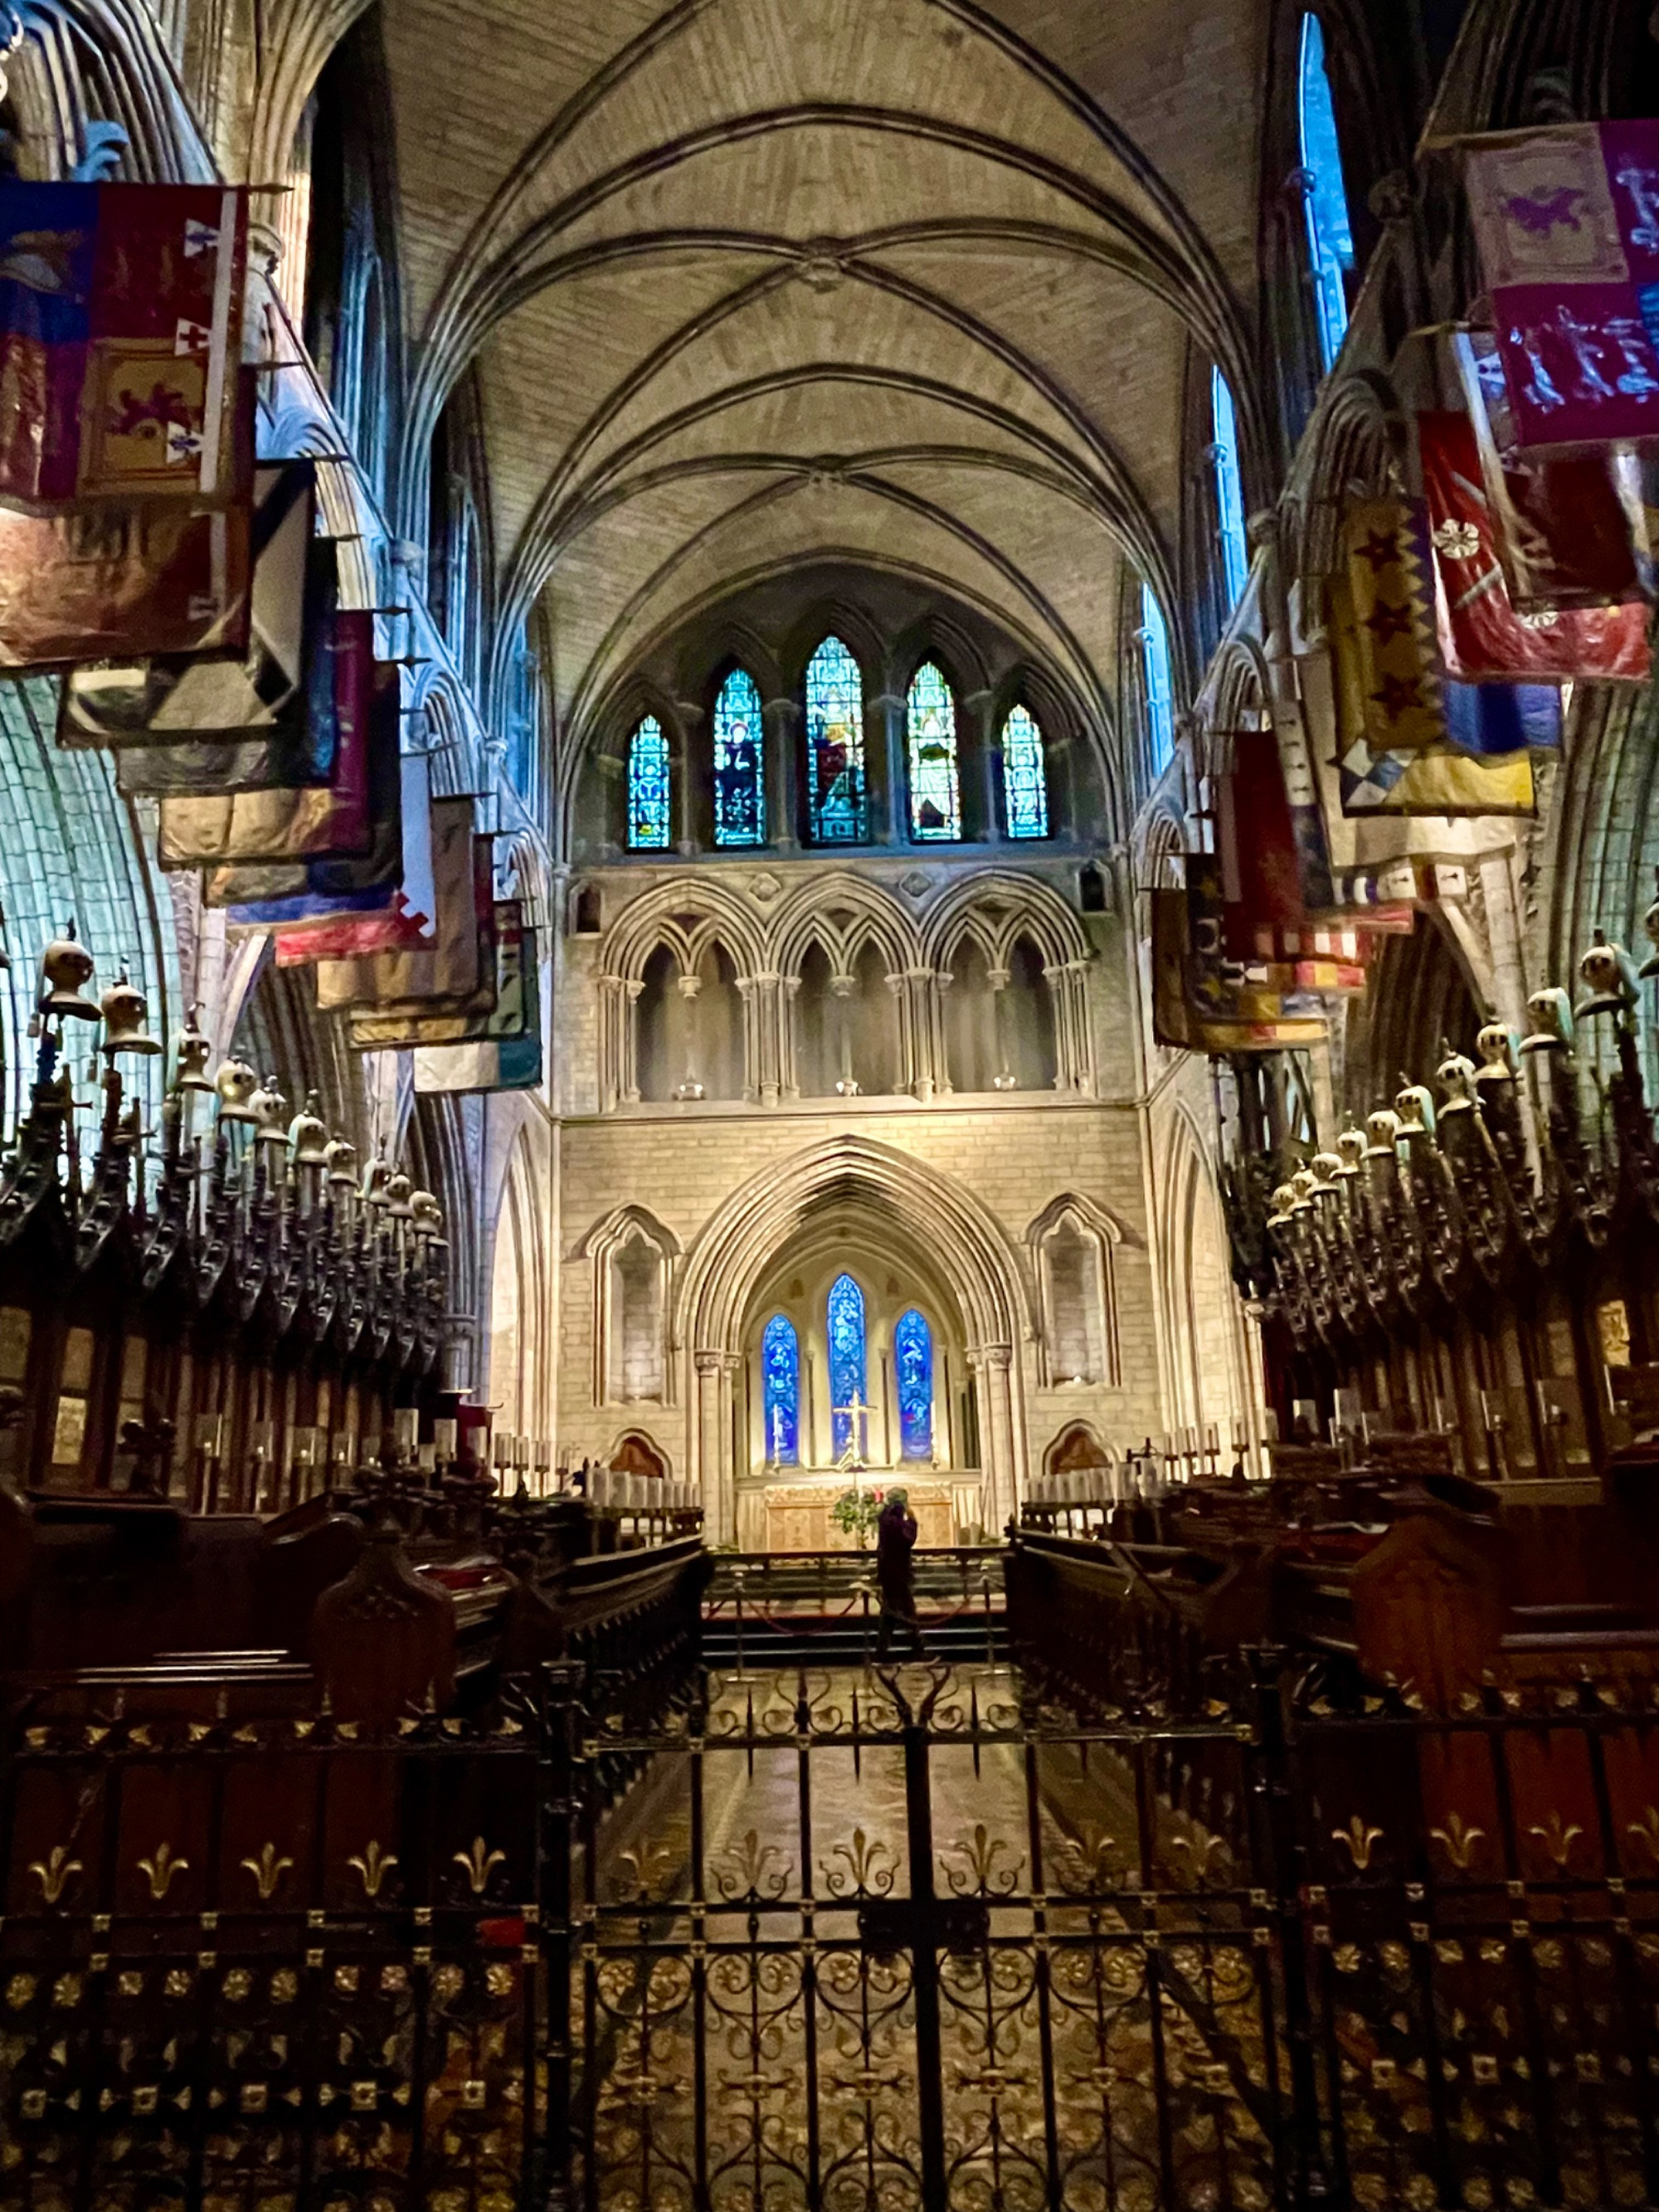 St. Patrick's Cathedral, Ireland